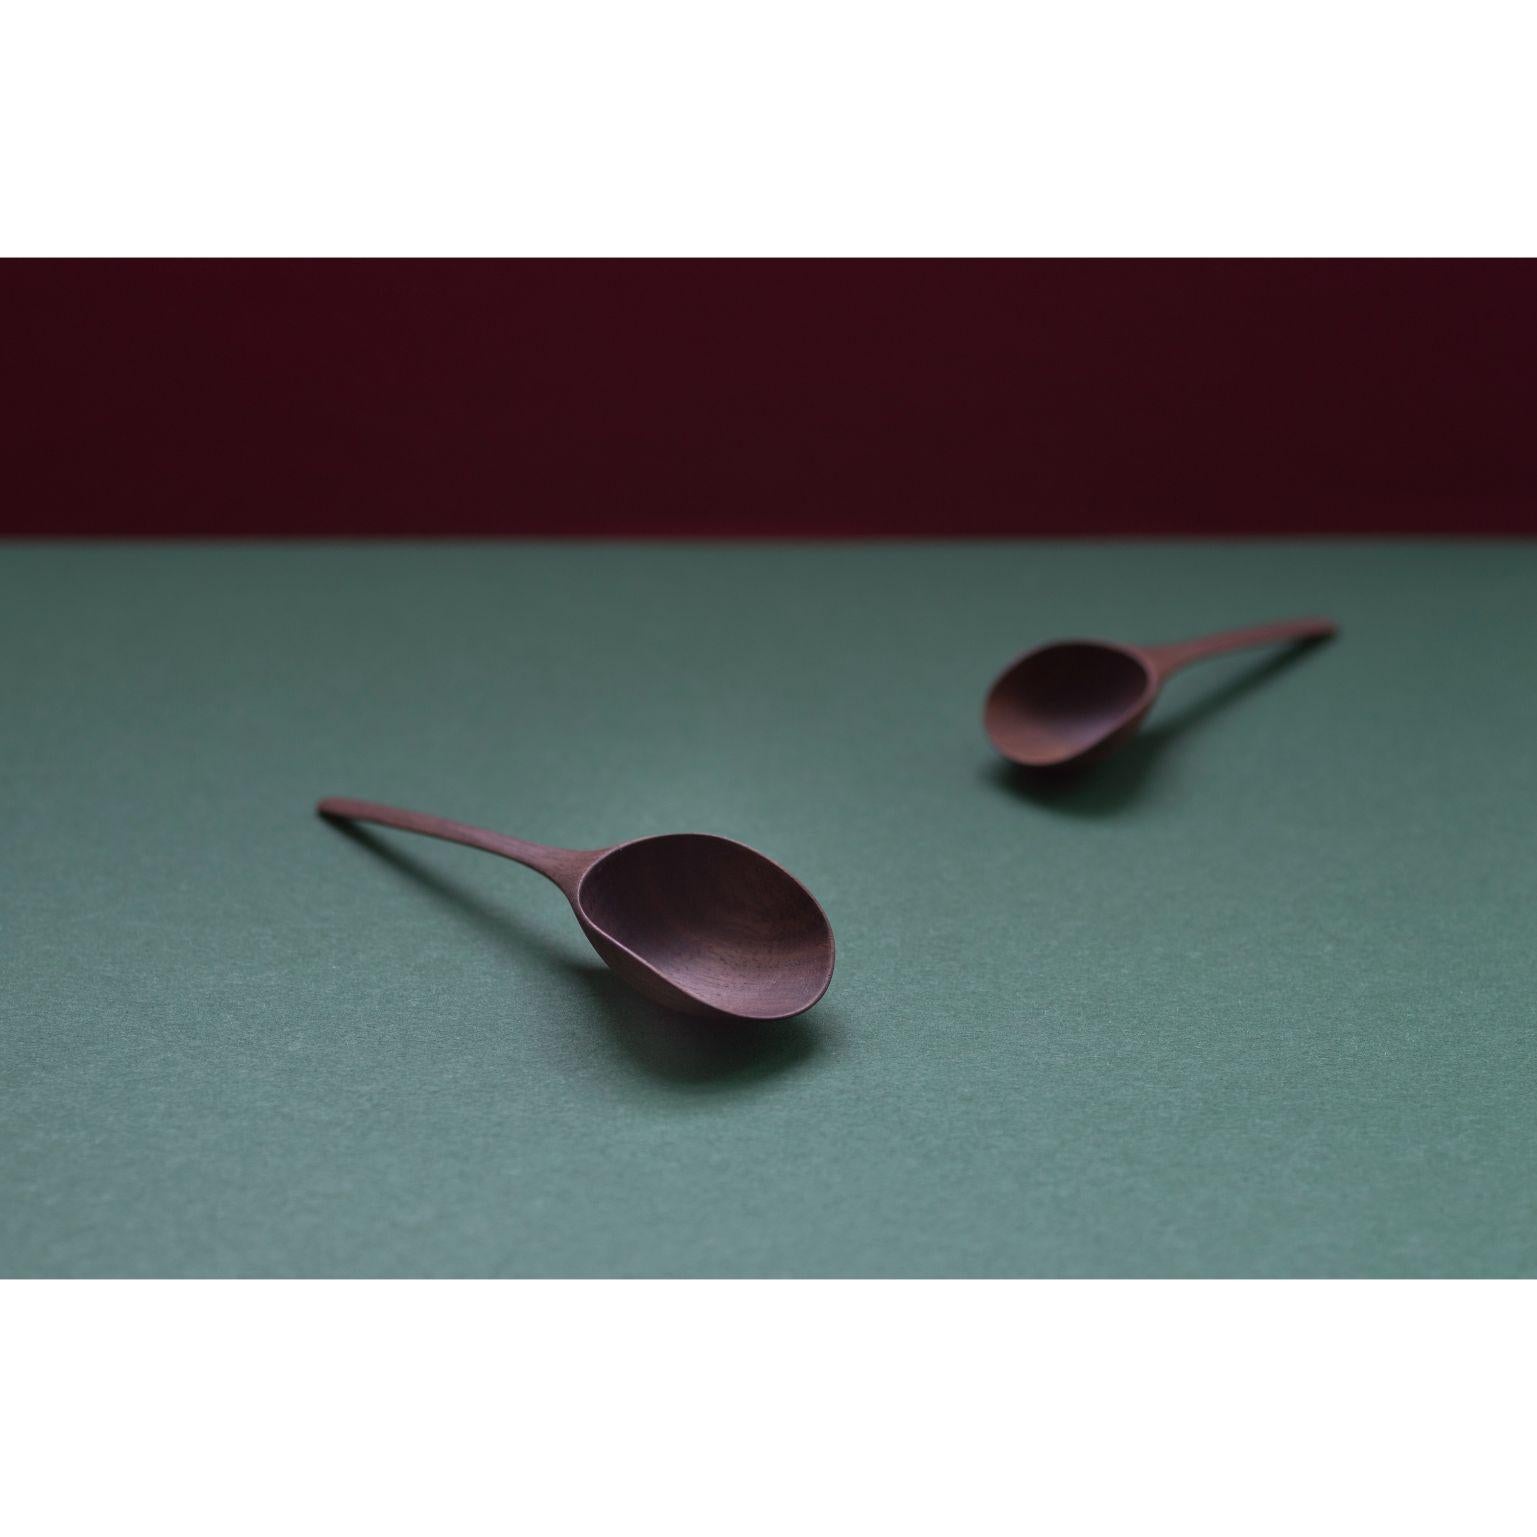 Set of 2 Kupu spoons by Antrei Hartikainen
Materials: Walnut, Maple, Natural Oil Wax
Dimensions: W 10 cm

Also Available in a variety of woods.

The unusual proportions of the kupu spoons give them an unexpected, delicate charm. Perfect for